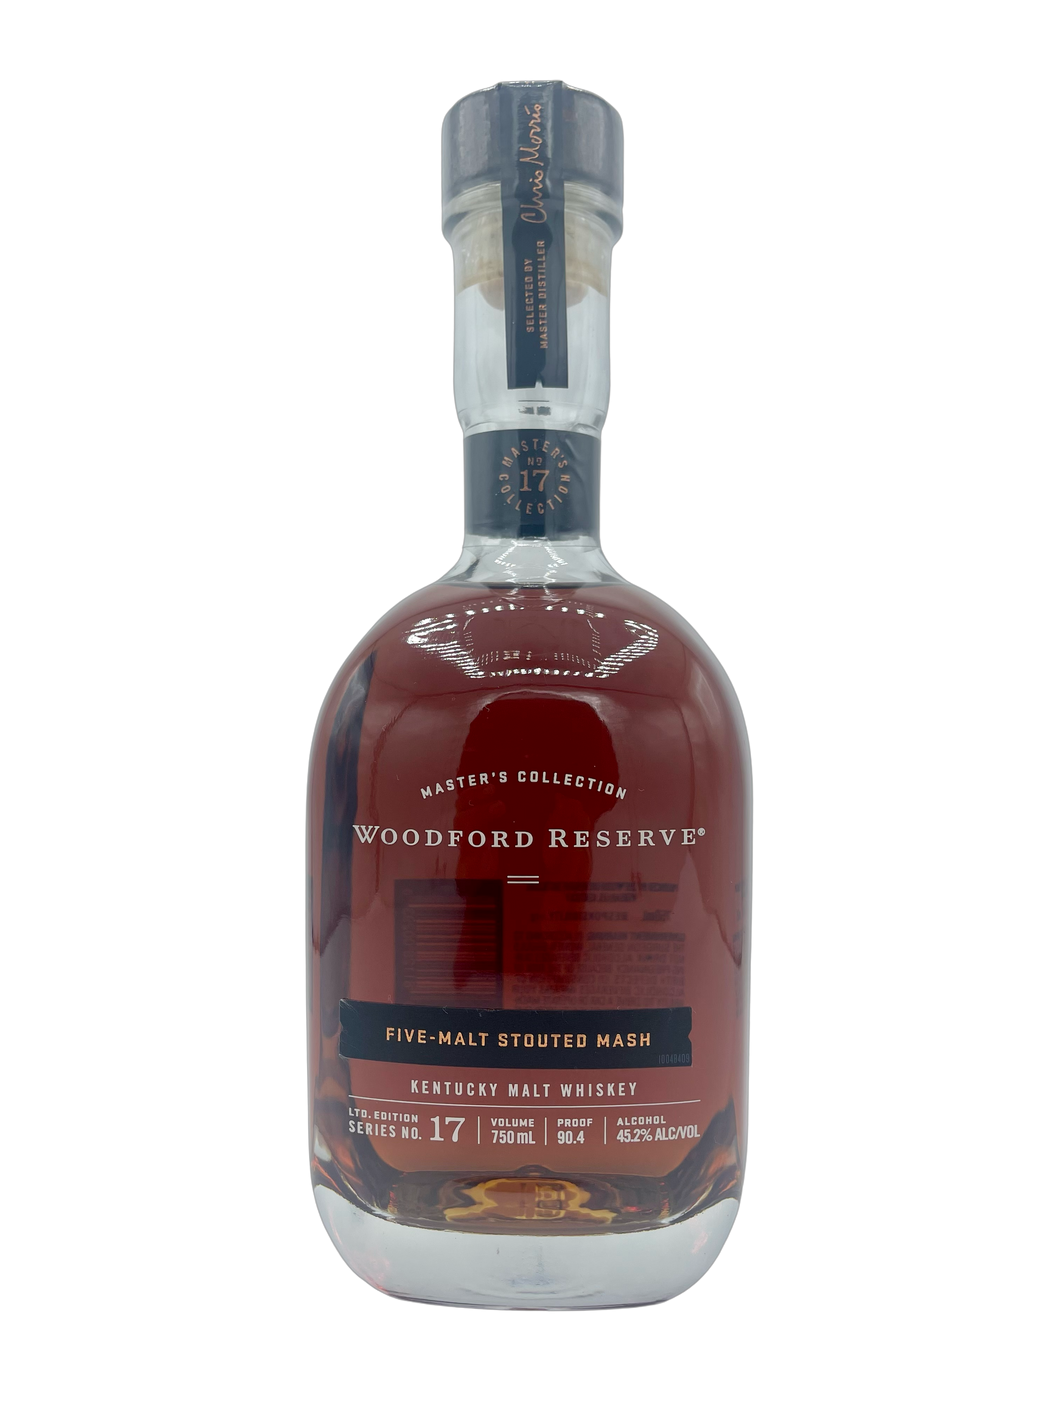 Woodford Reserve Master's Collection Five-Malt Stouted Mash Bourbon 750mL